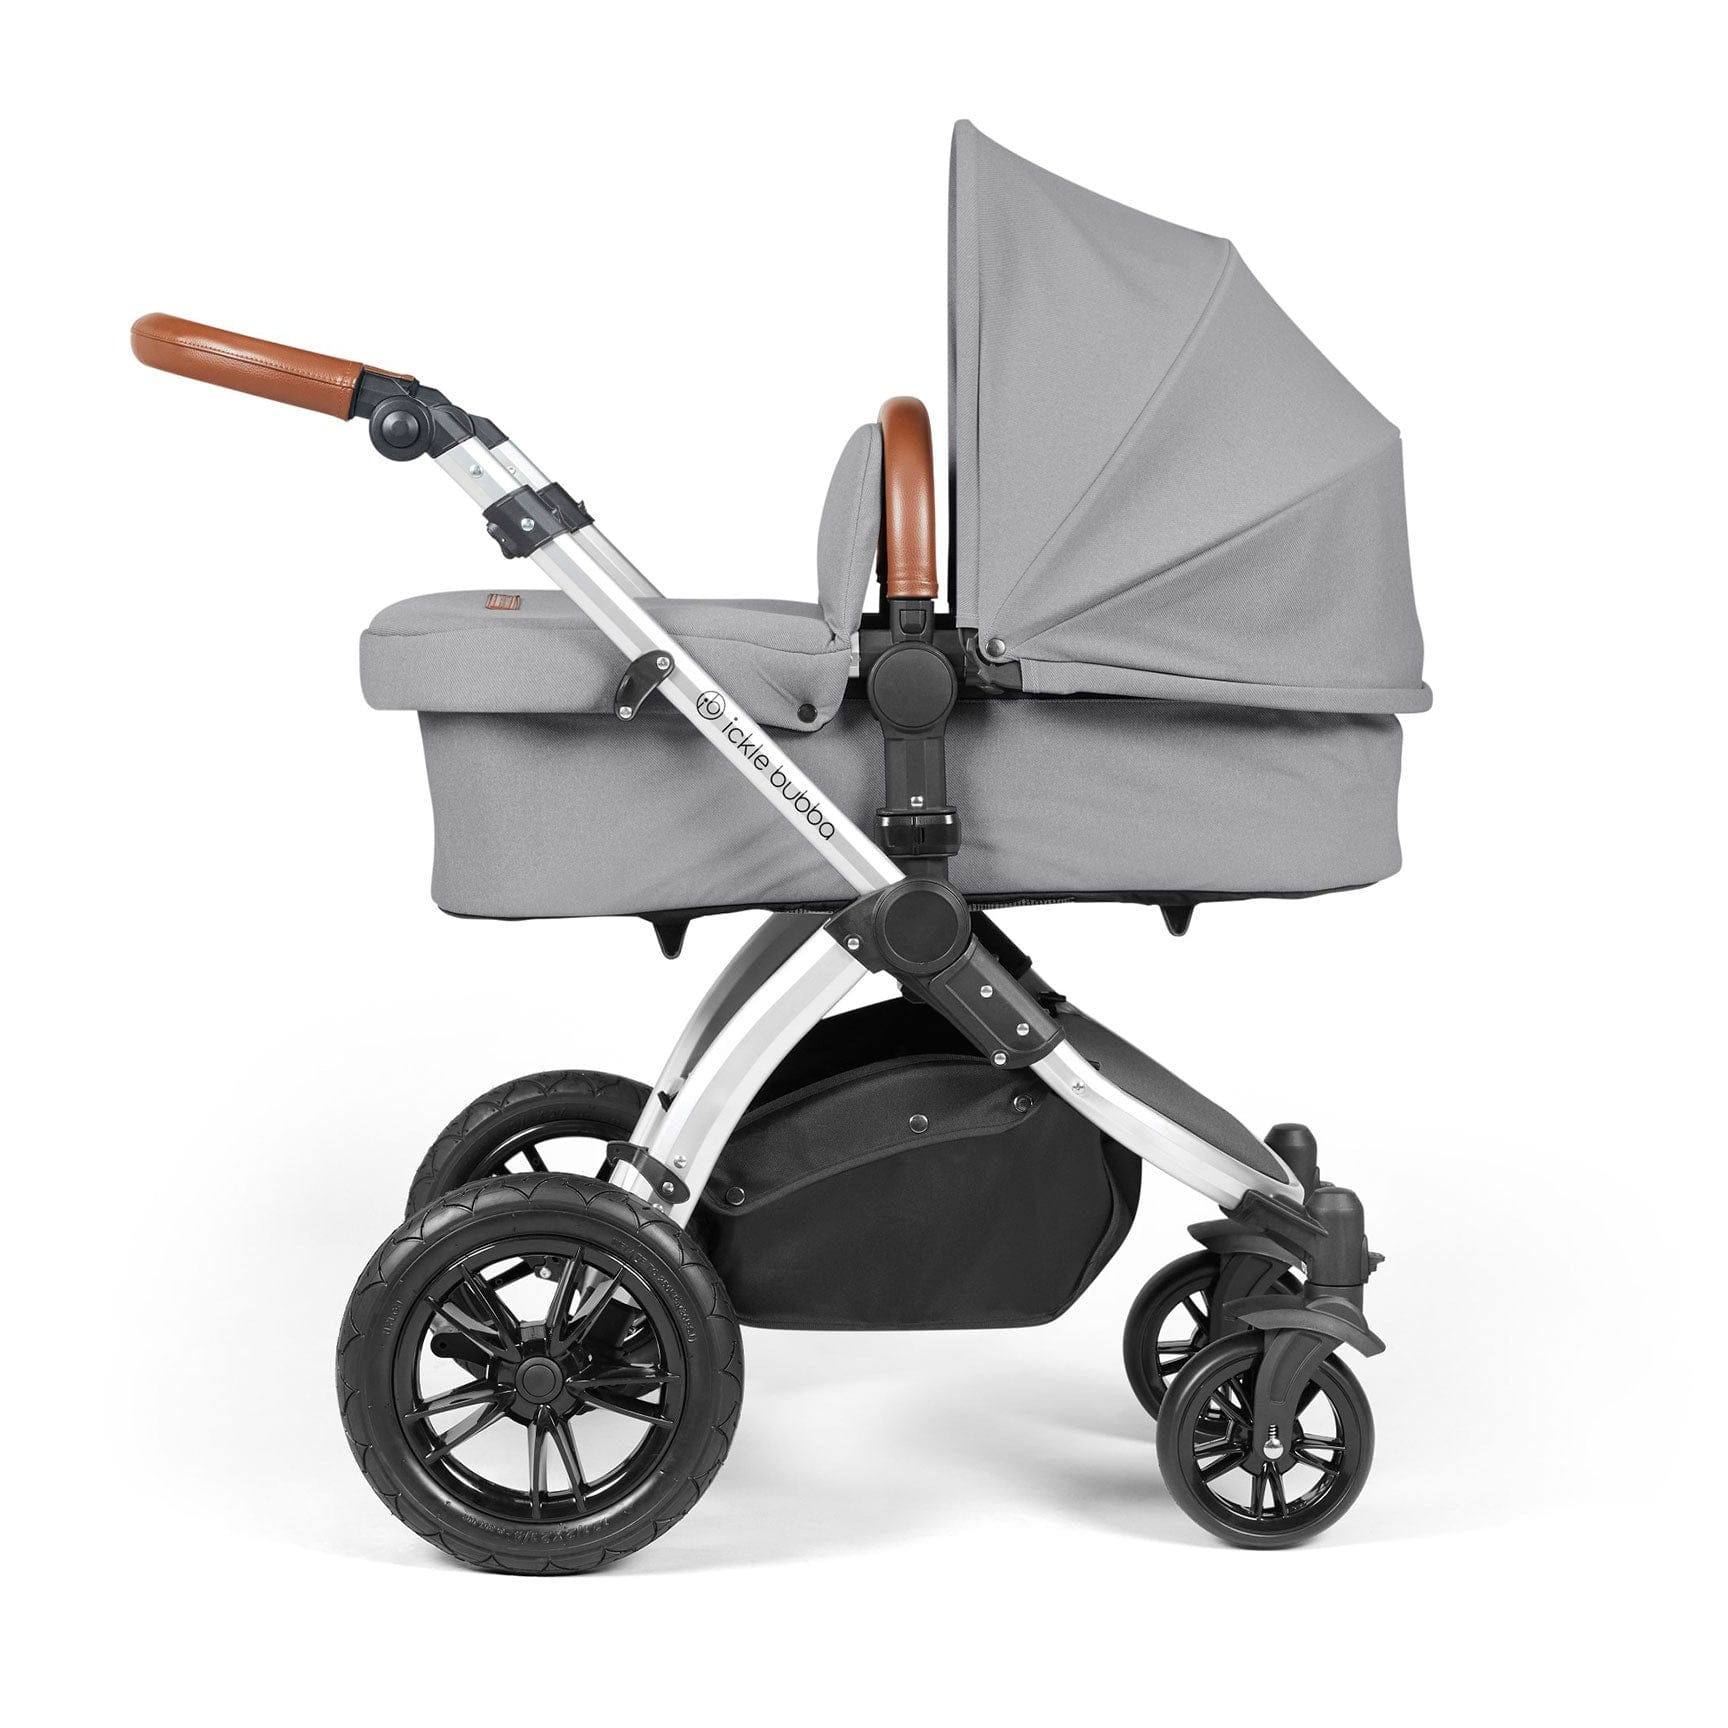 Ickle Bubba travel systems Ickle Bubba Stomp Luxe All-in-One Travel System with Isofix Base - Silver/Pearl Grey/Tan 10-011-300-260